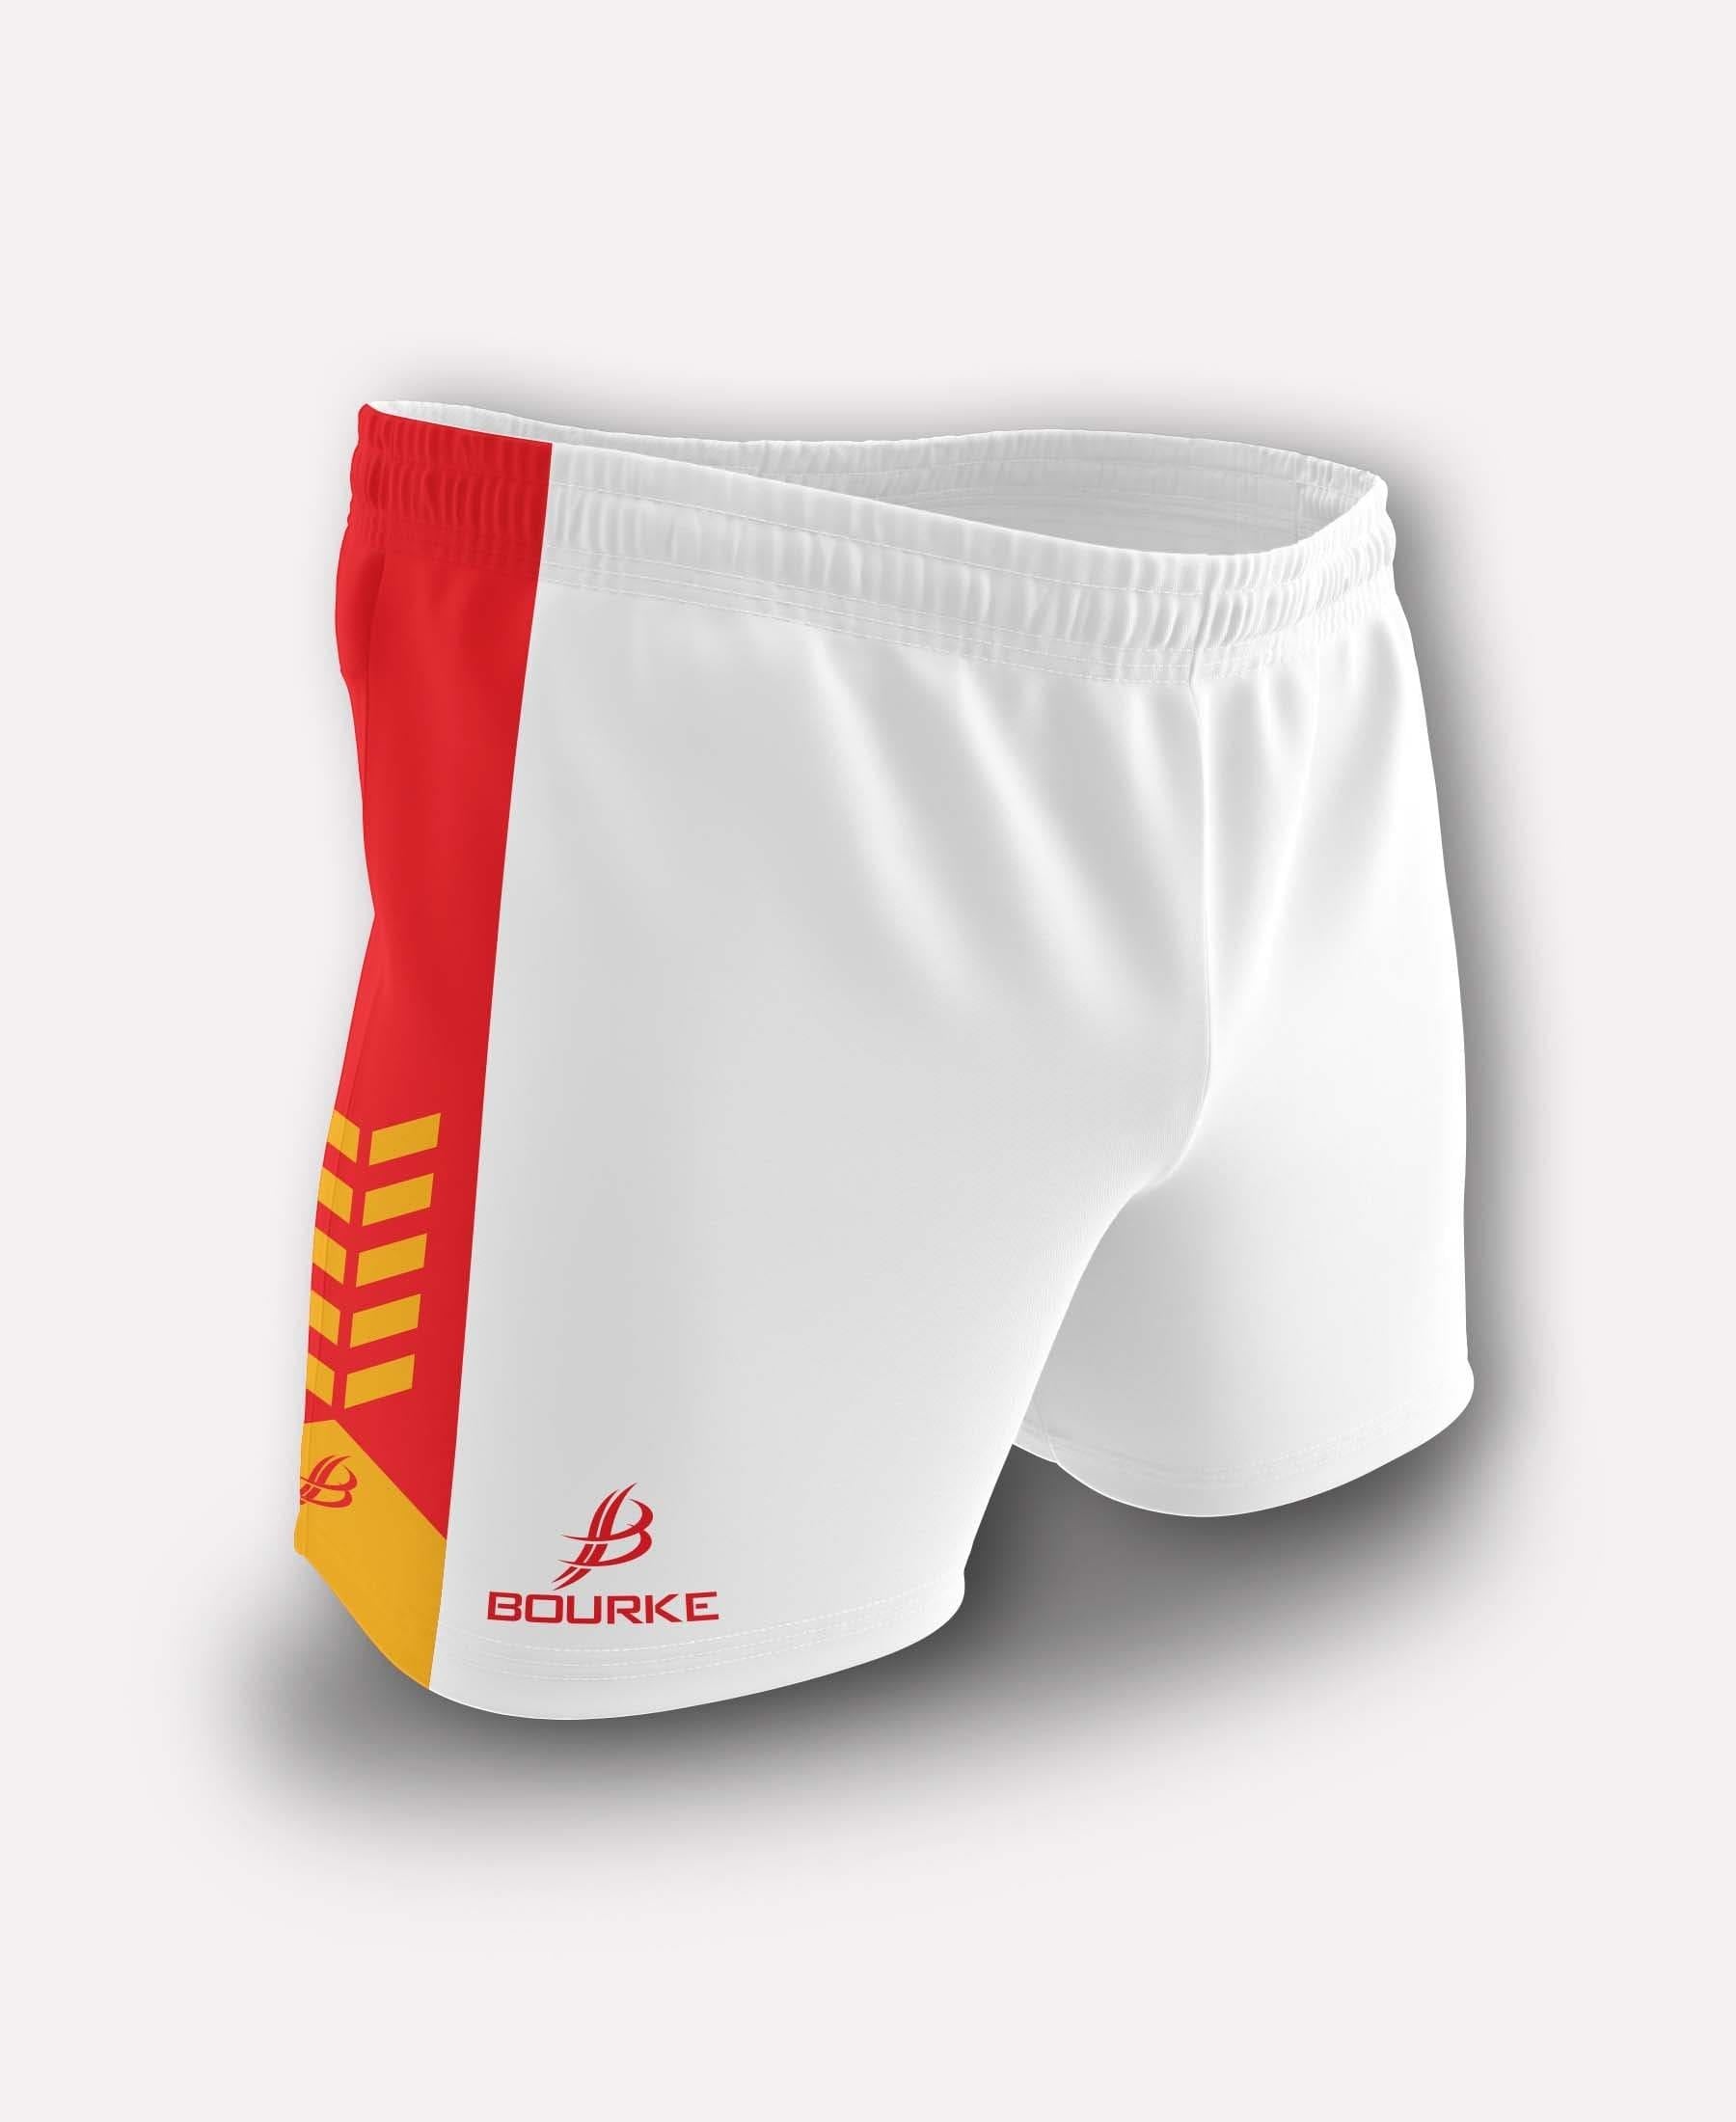 Chevron Adult Shorts (White/Red/Amber) - Bourke Sports Limited